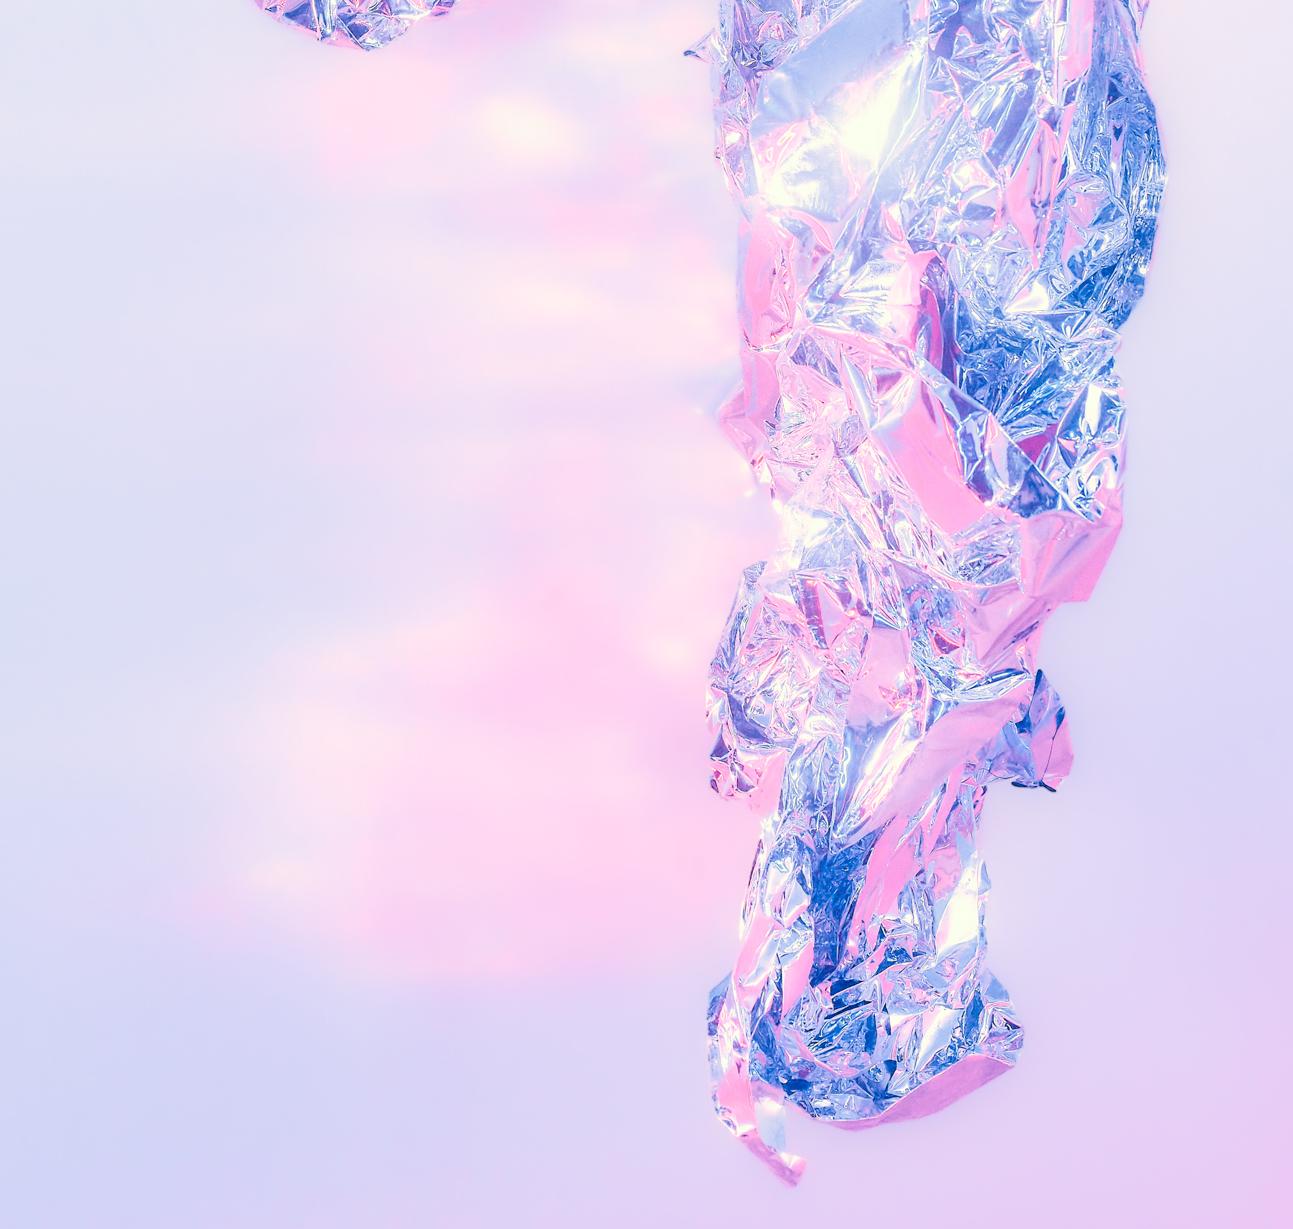 Materia VI, From The Series Materia, Abstract Limited Edition Color photograph - Photograph by Mikael Kenta